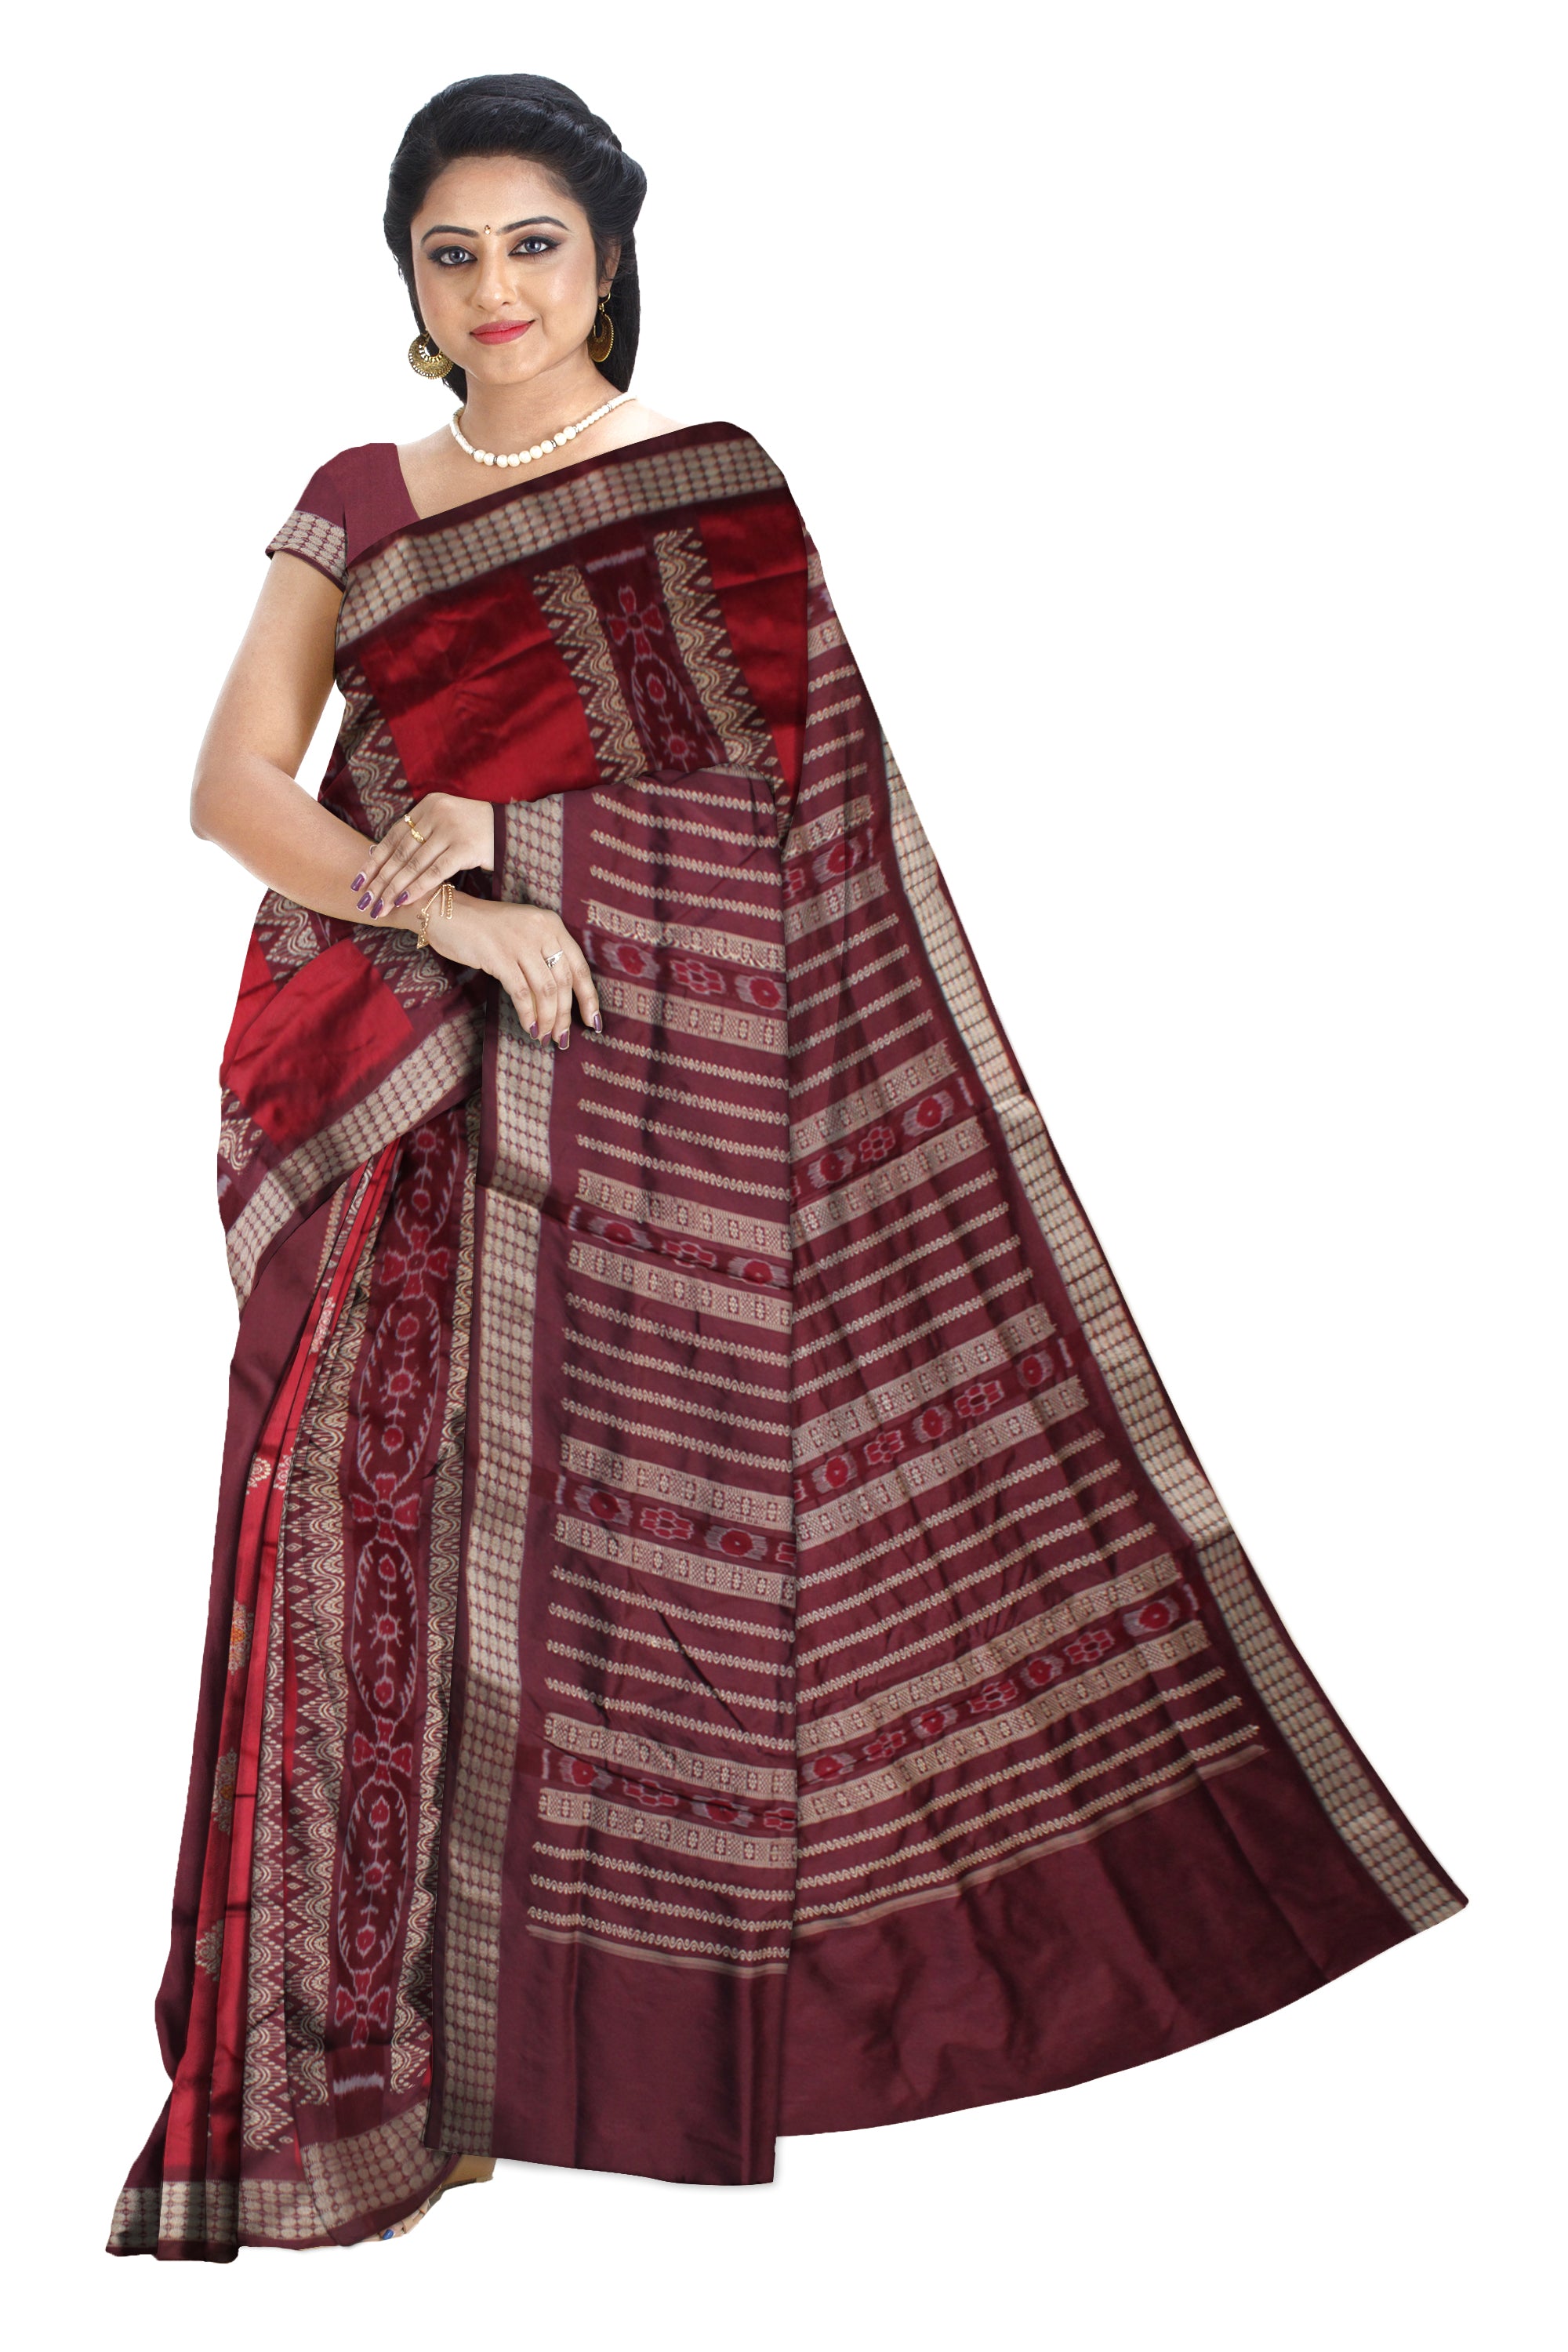 HALF BODY DESIGN PATLI PATA SAREE IS MAROON AND COFFEE COLOR BASE,COMES WITH MATCHING BLOUSE PIECE. - Koshali Arts & Crafts Enterprise